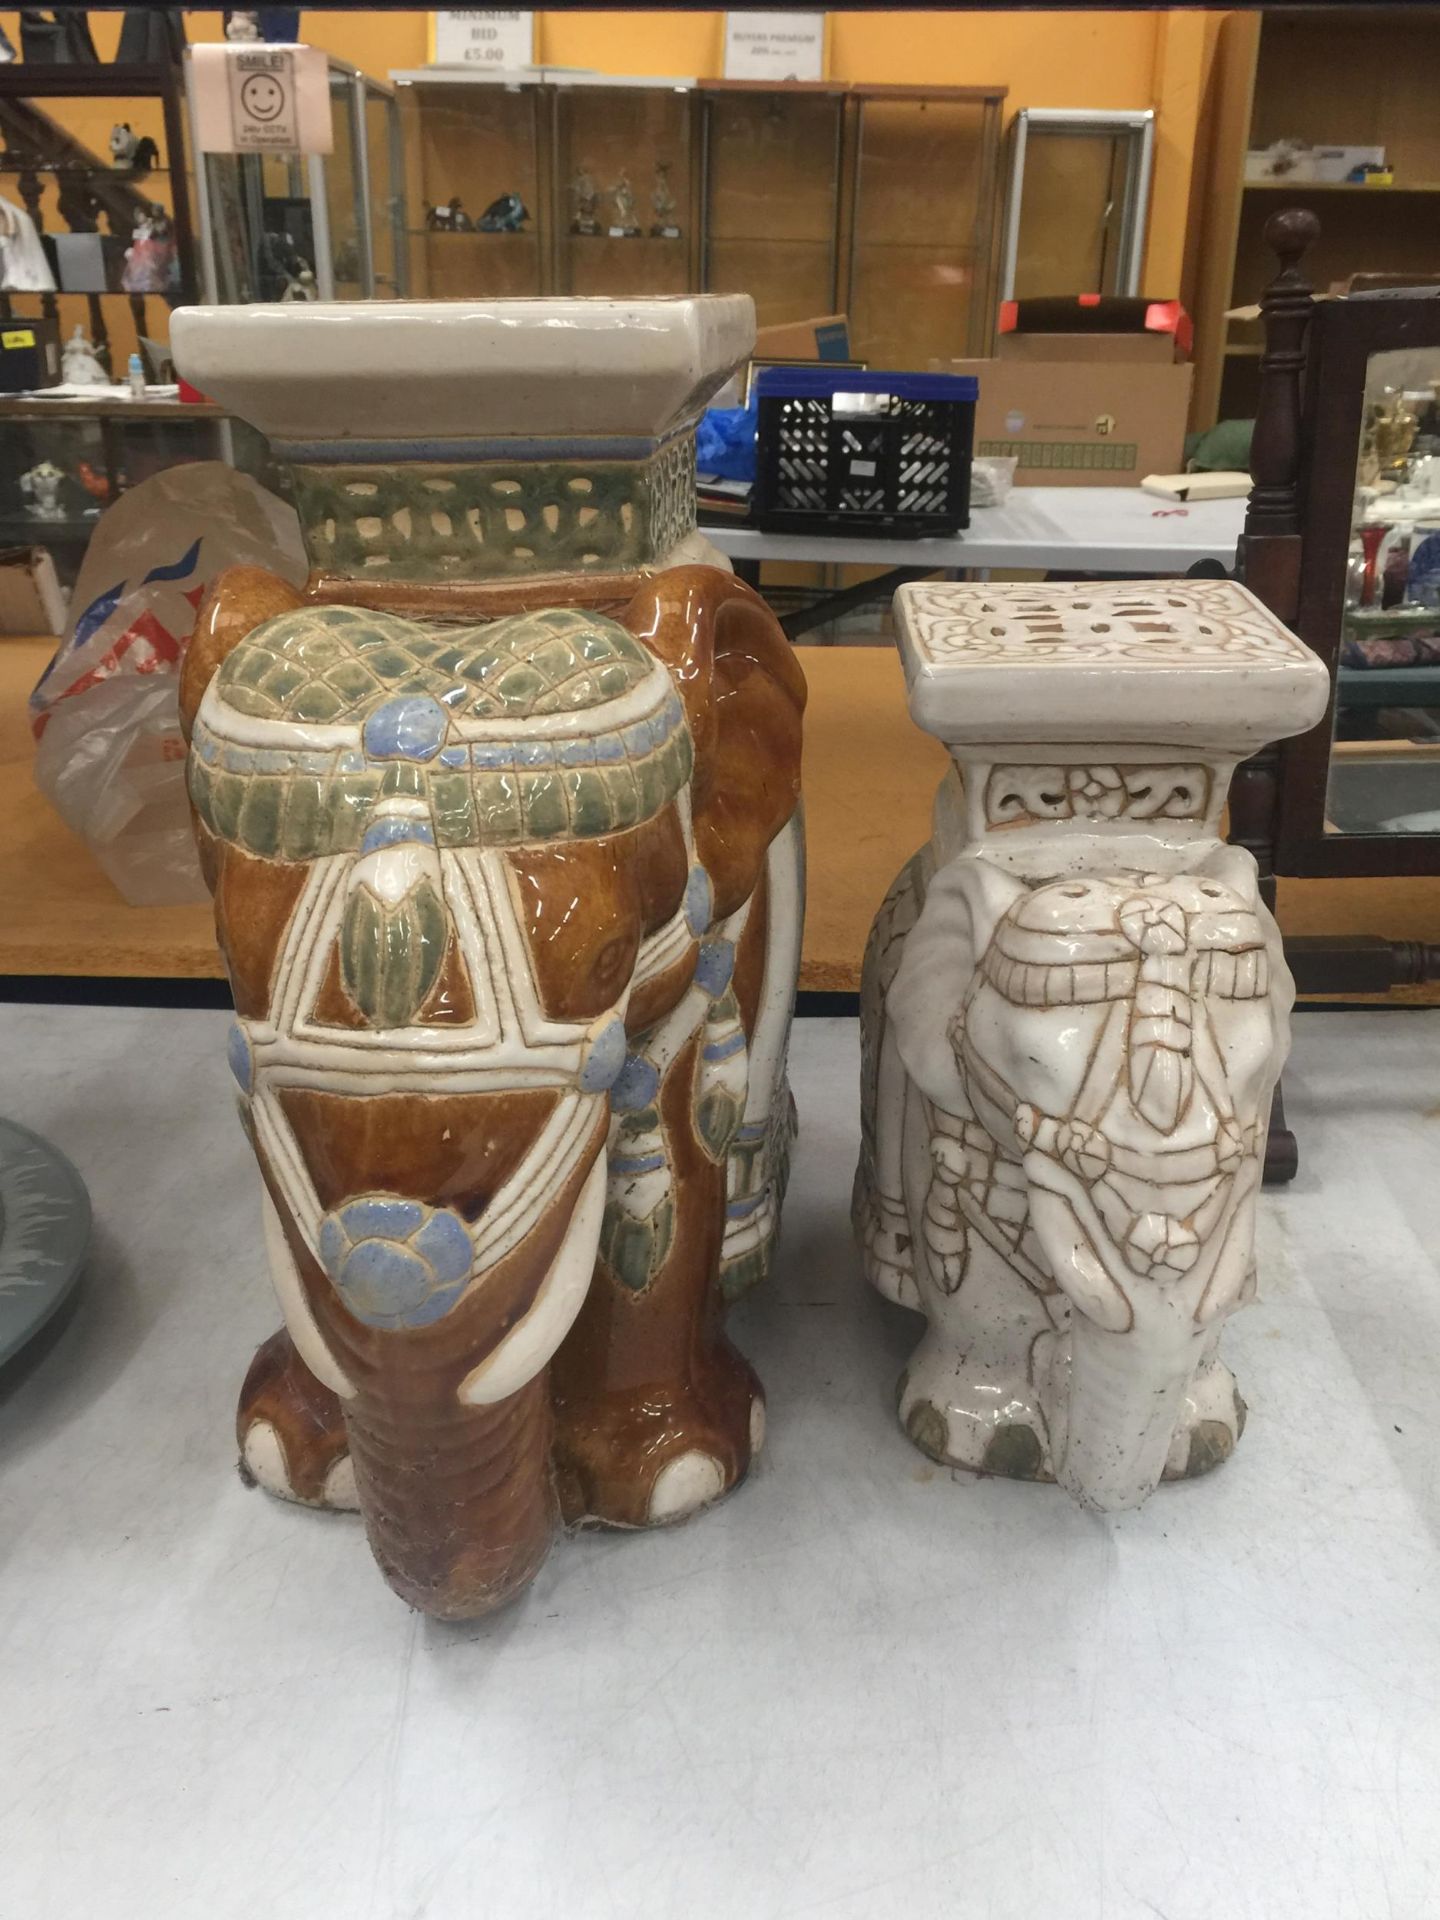 TWO LARGE CERAMIC ELEPHANT PLANT STANDS/SEATS